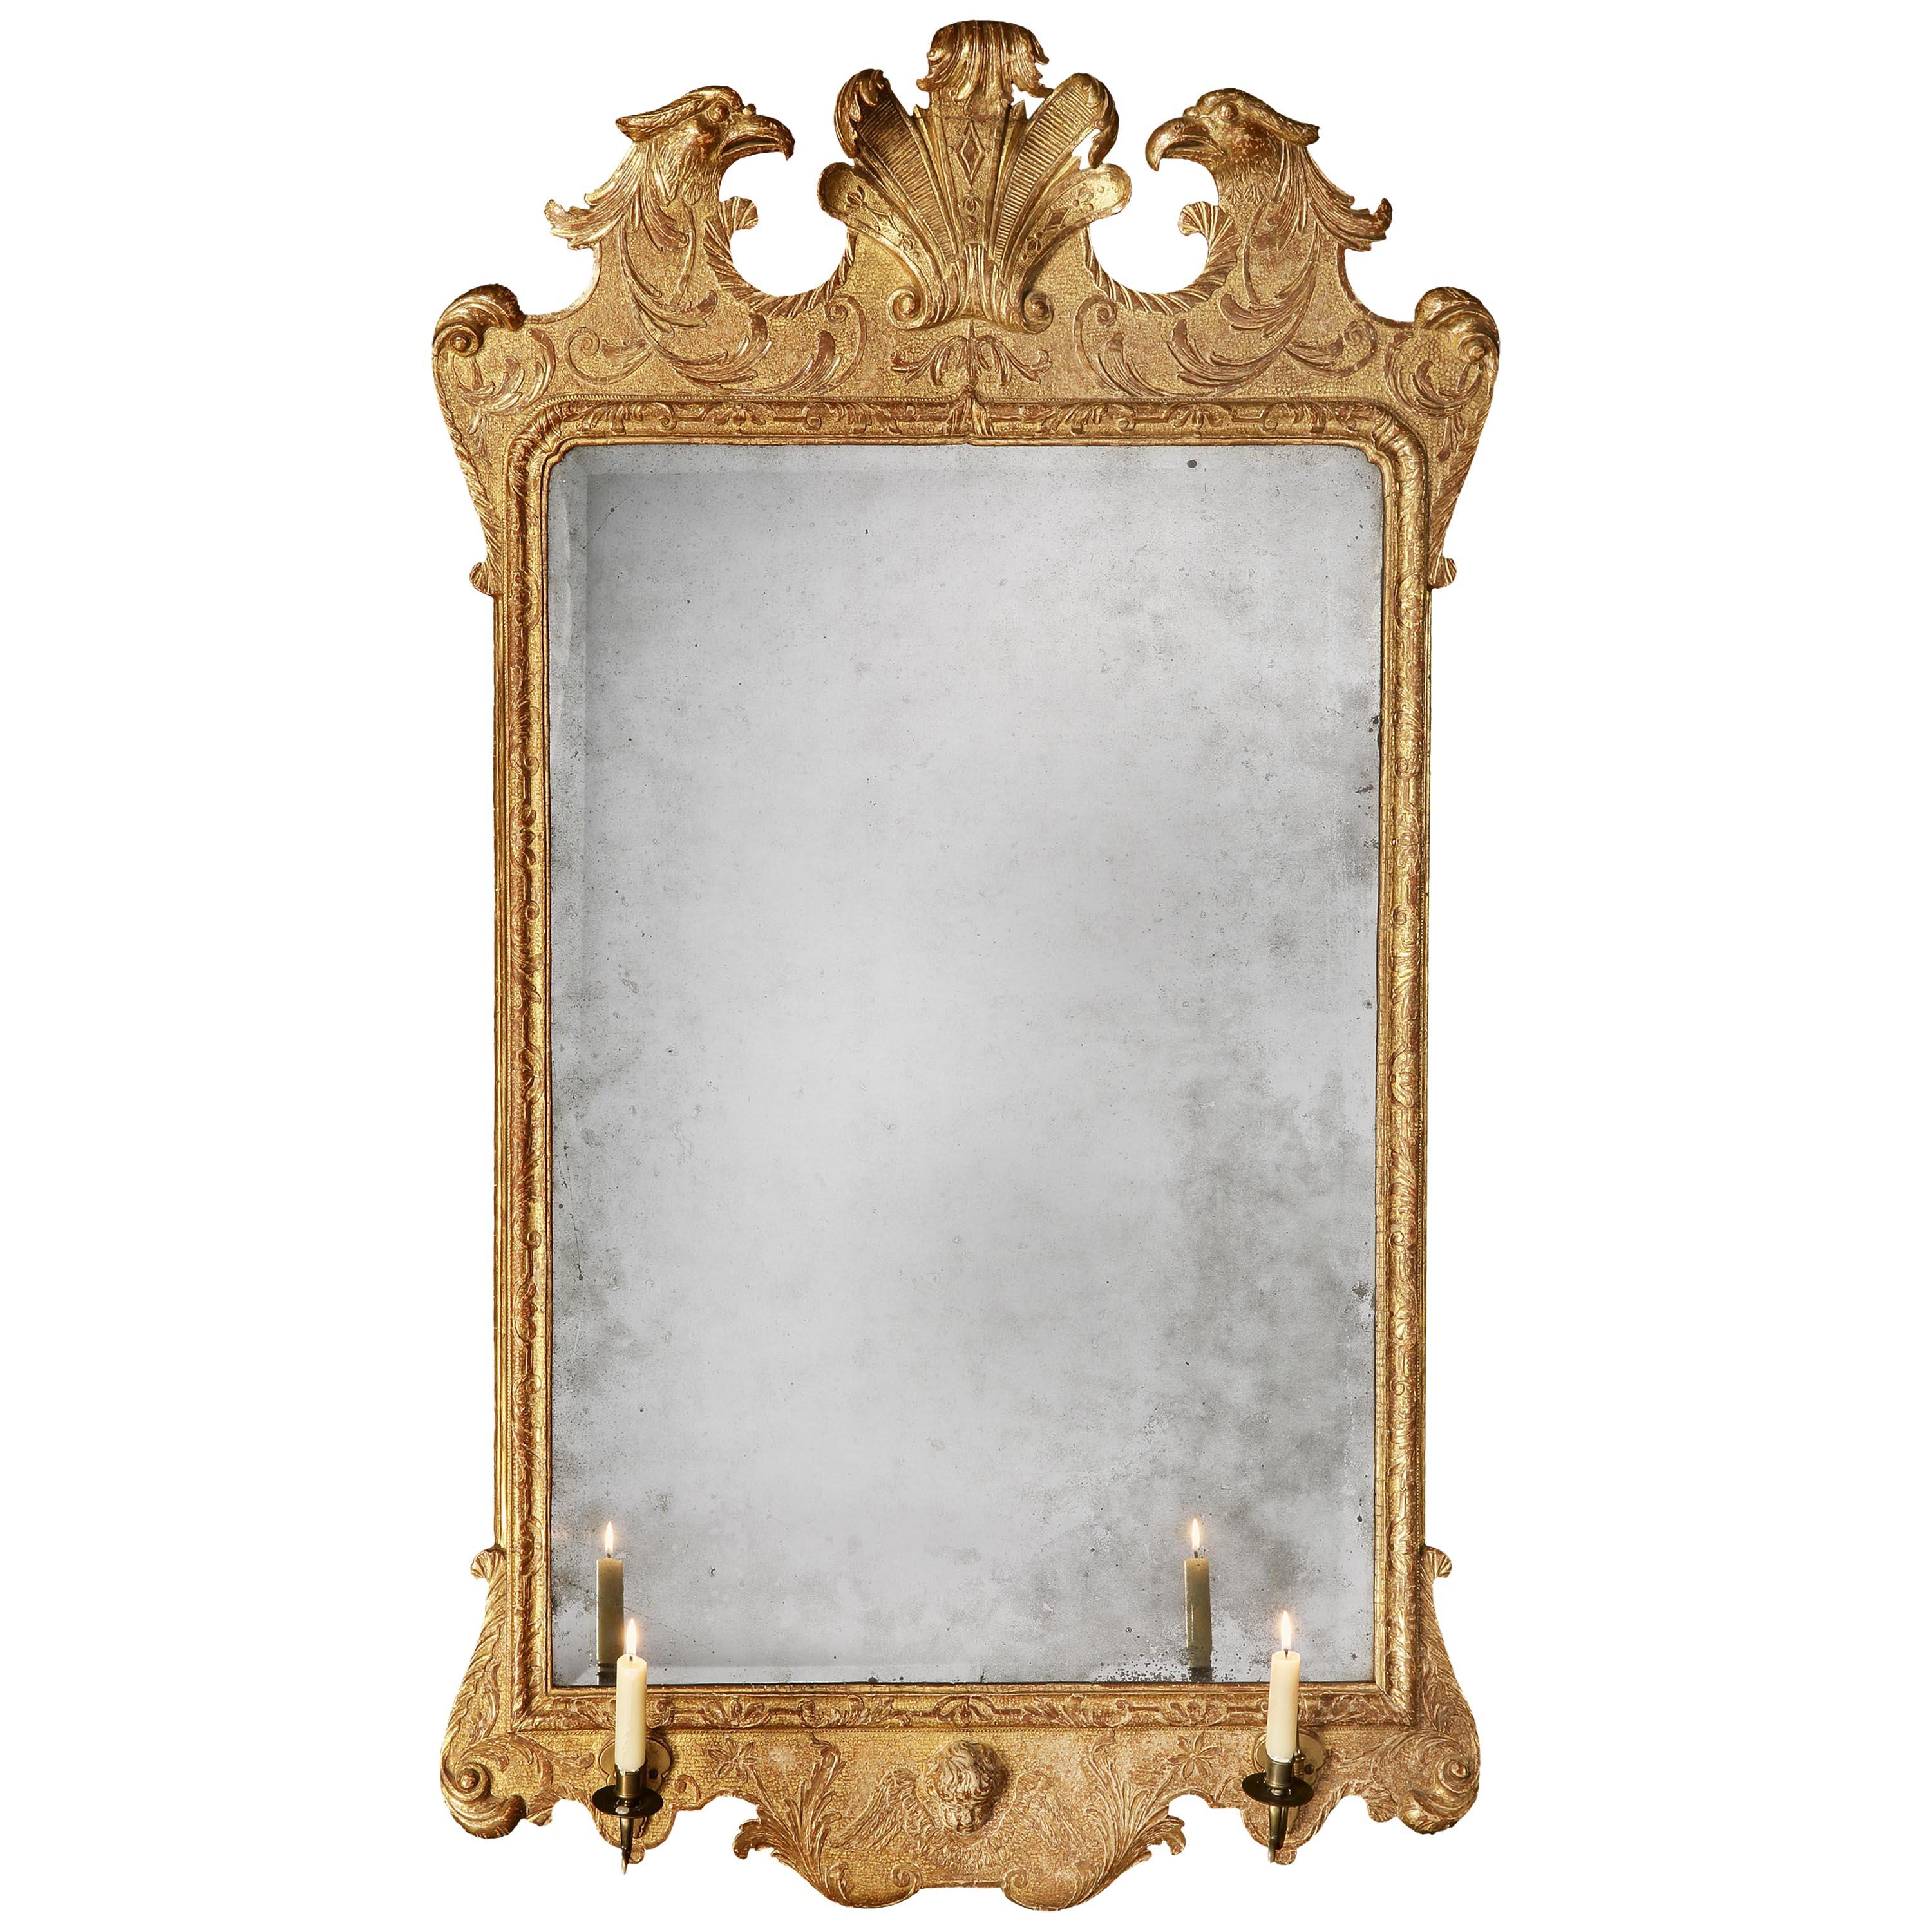 18th Century George II Giltwood Mirror with Eagles Attributed to John Belchier